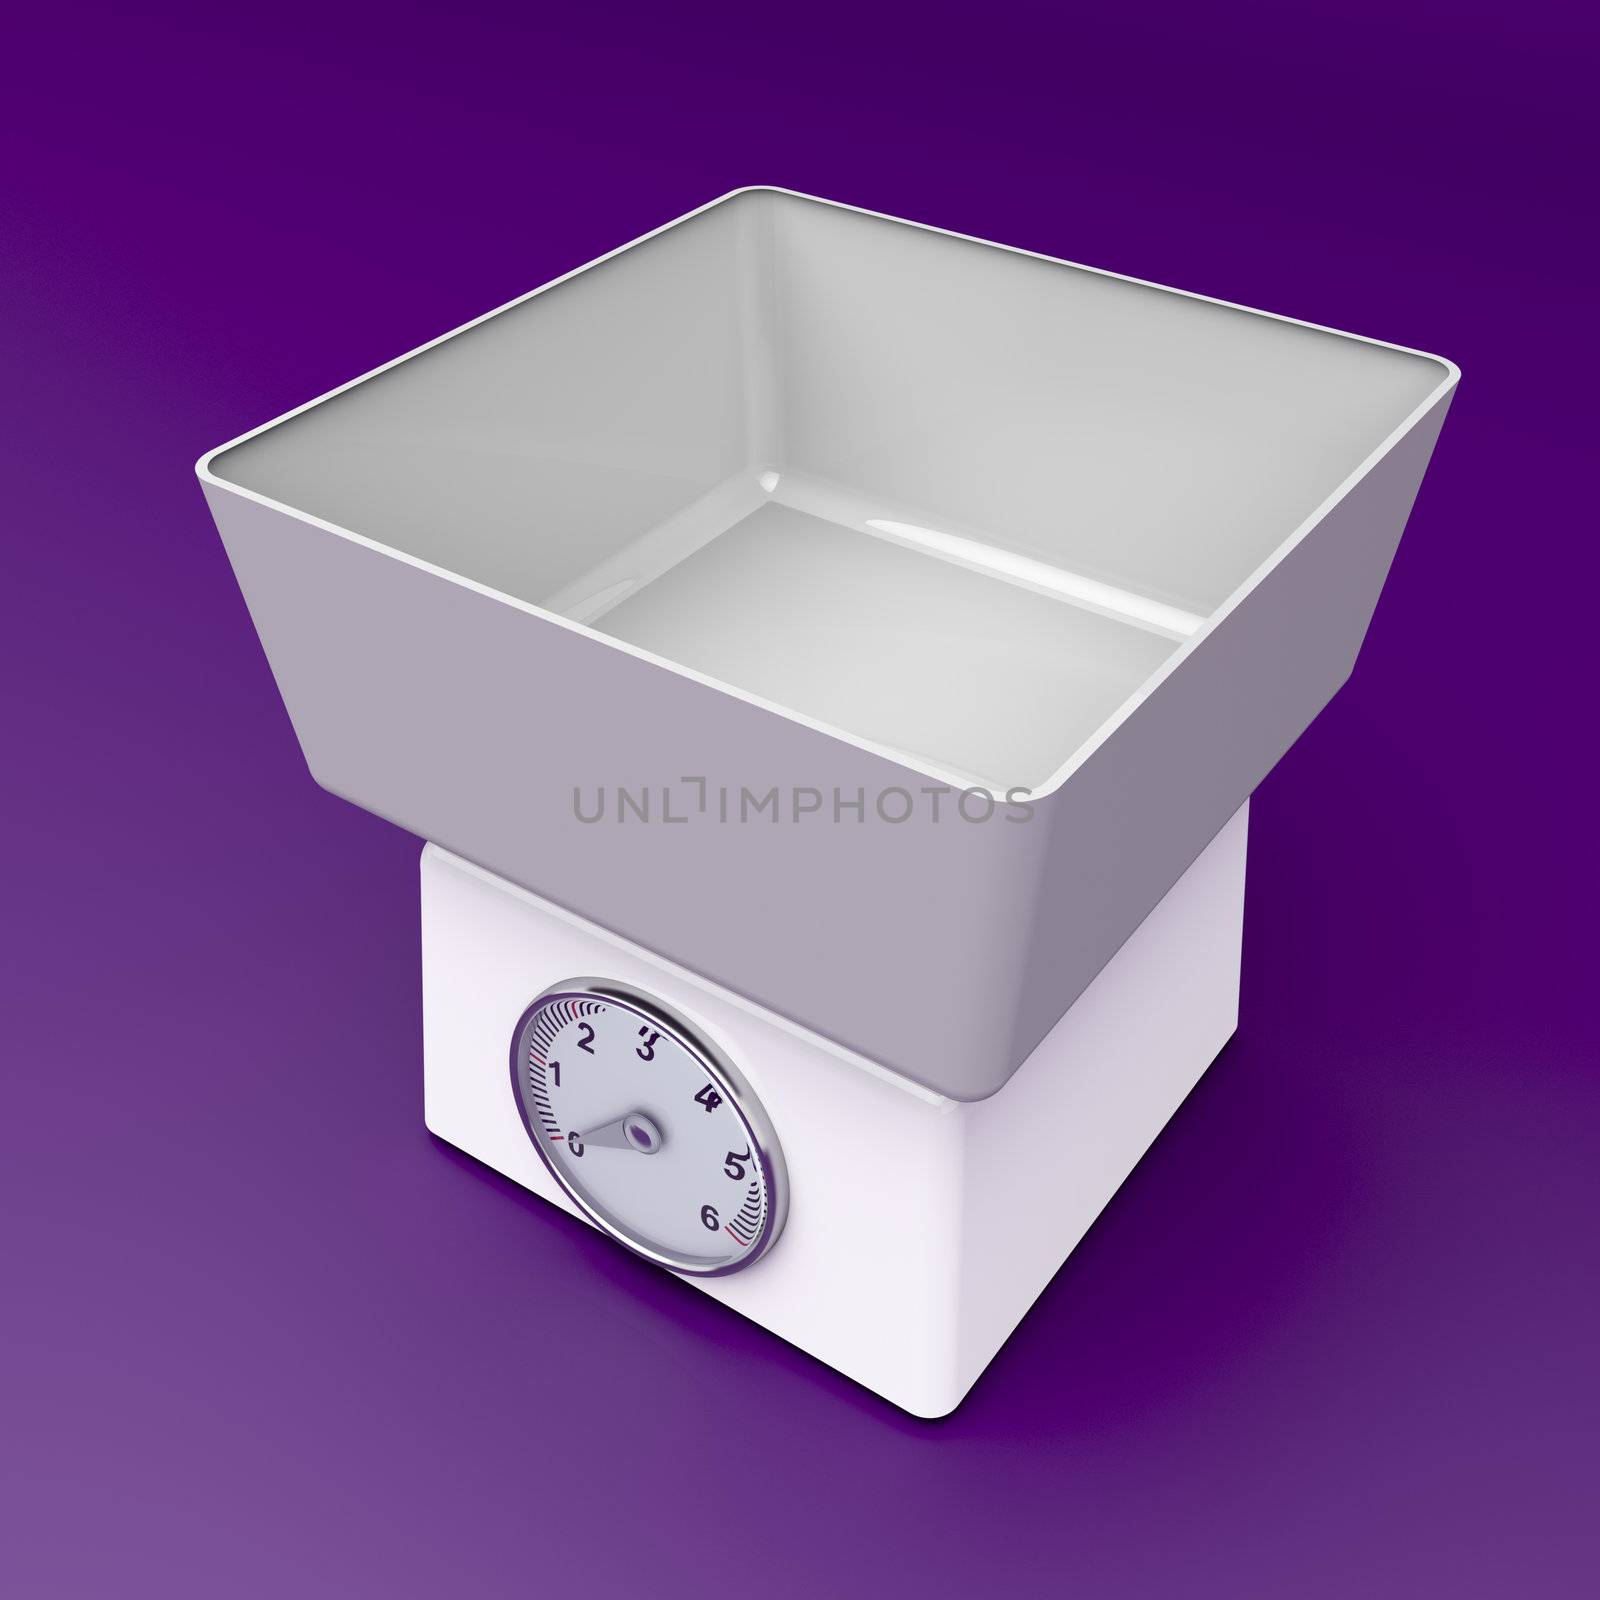 3d image of white retro weight scale on purple background